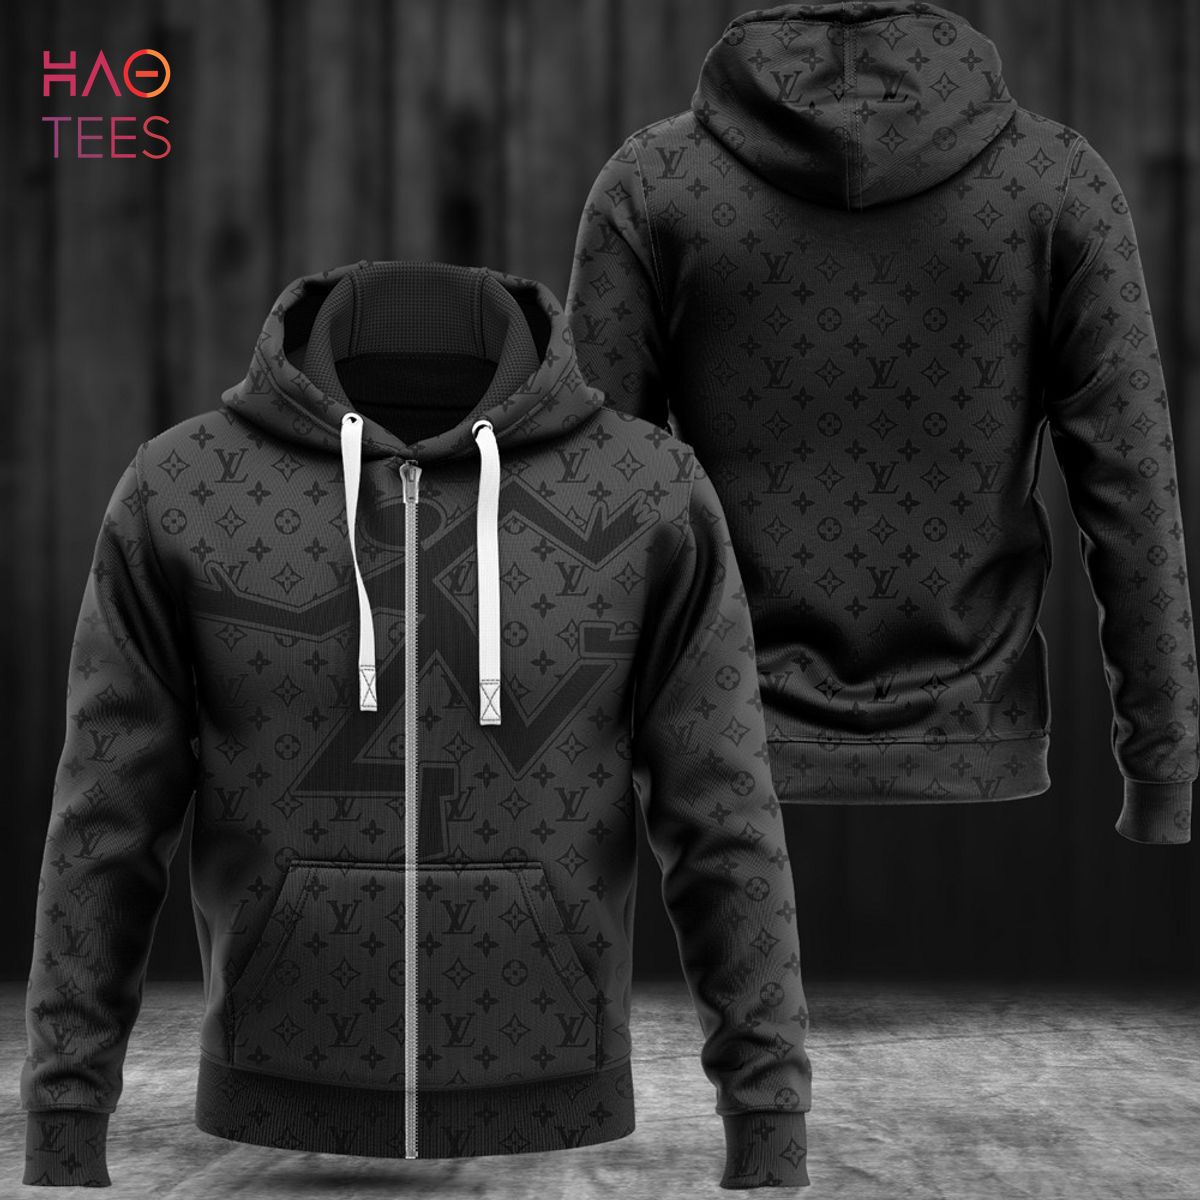 LIMITED DESIGN Louis Vuitton LV Black fashion house Geometric Hoodie Luxury  Brand Outfits